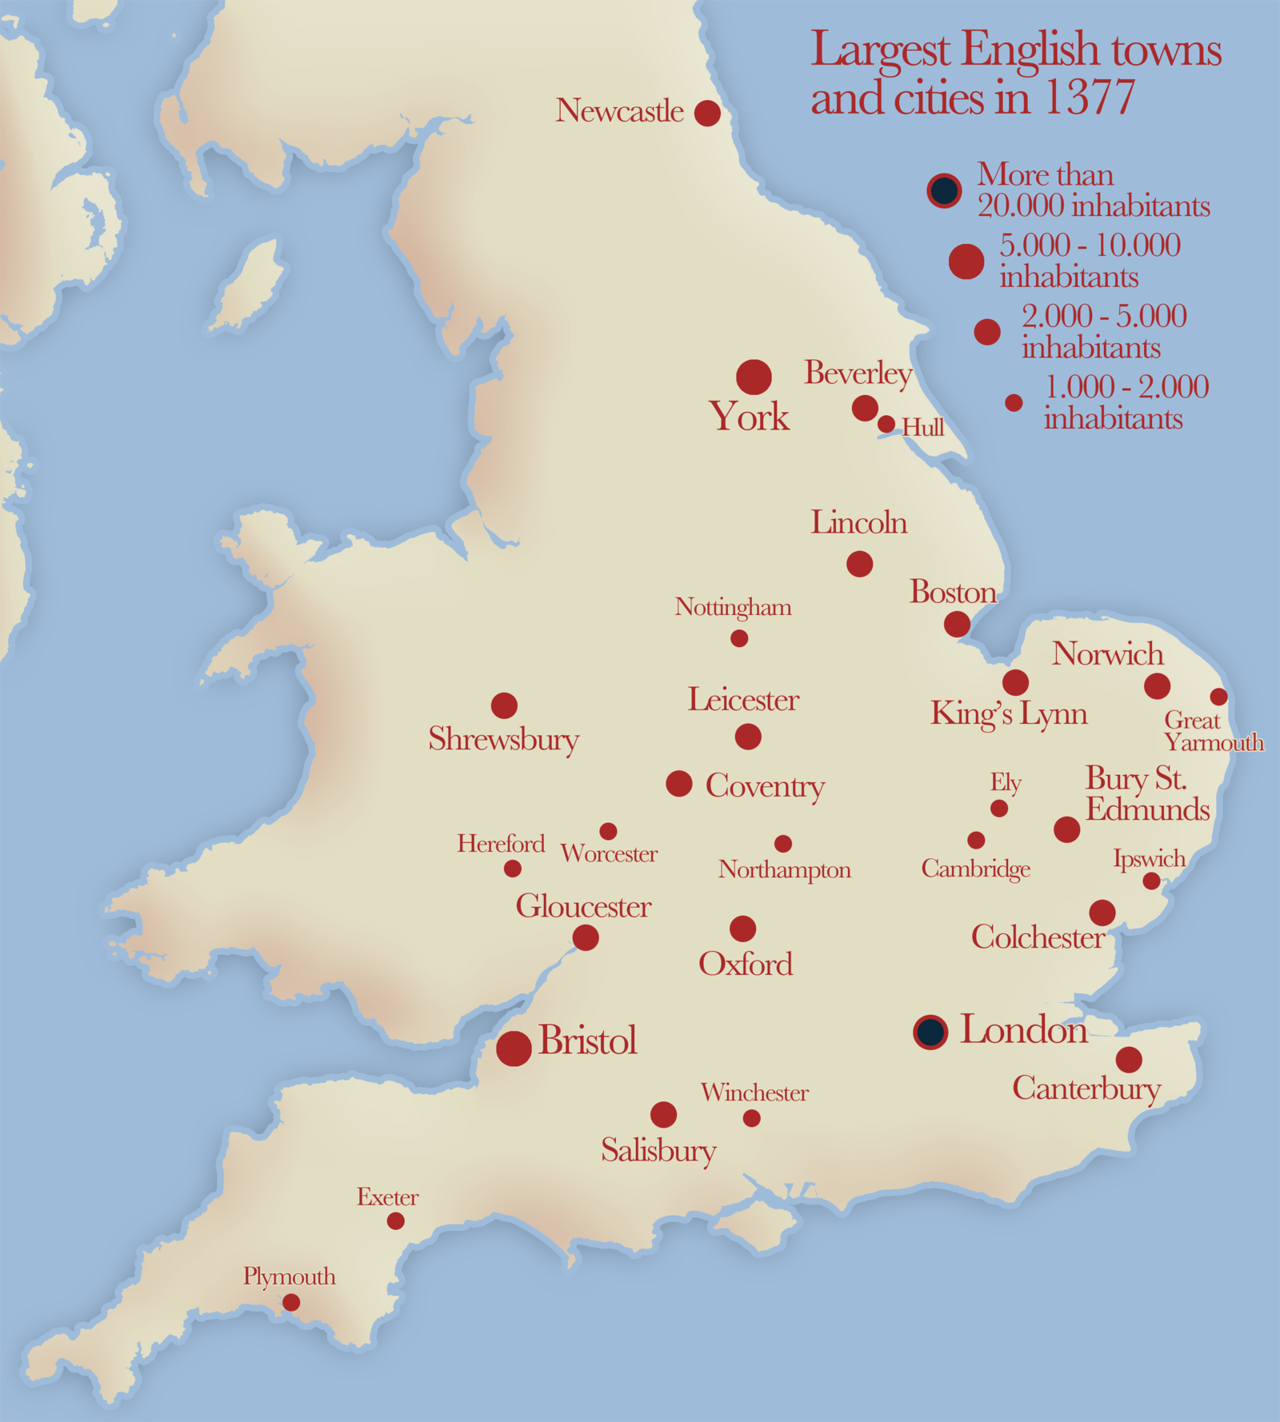 Largest English towns and cities in 1377. - Maps on the Web